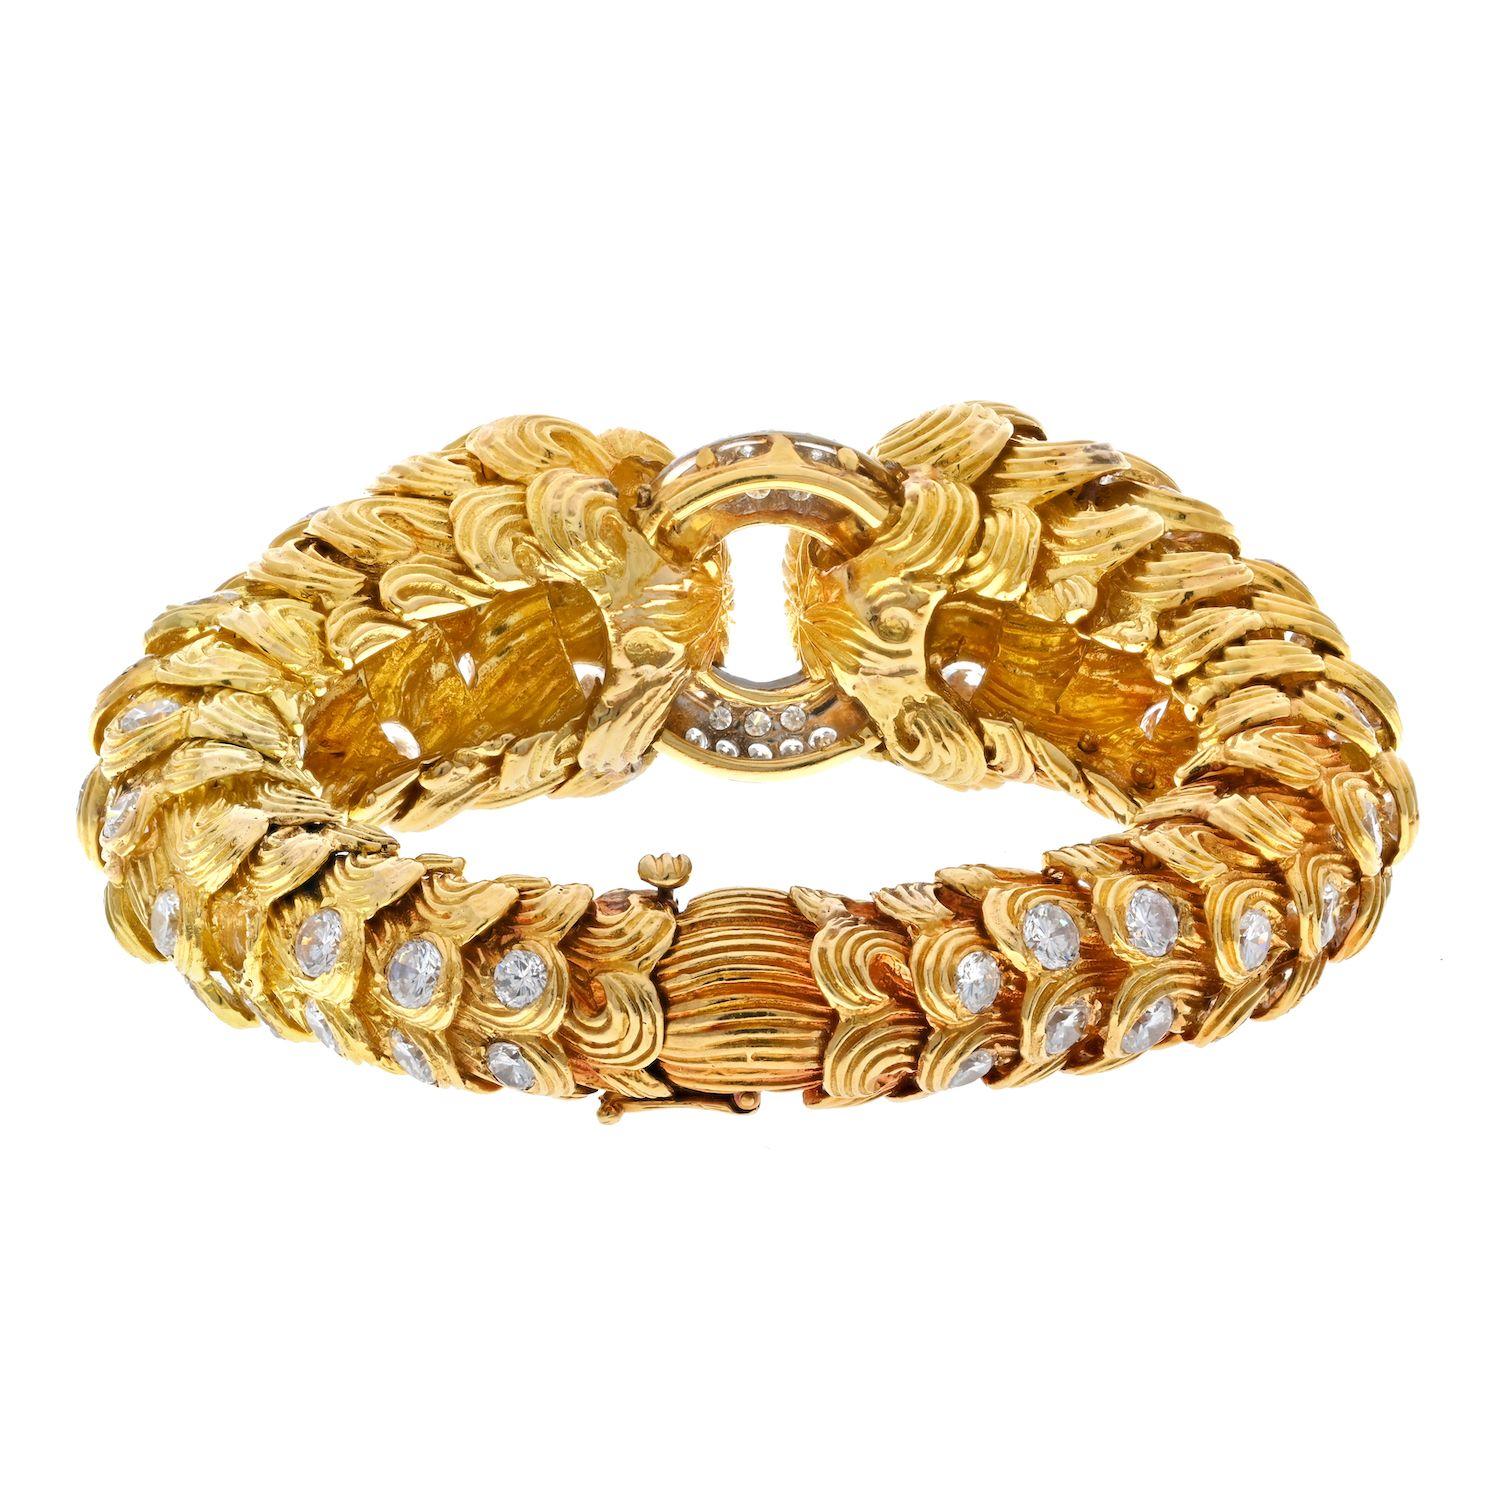 David Webb 18K Yellow Gold 21 Carats Scroll Diamond Textured Bracelet.
David Webb estate yellow gold diamond bracelet designed as a hinged bangle, with two opposing textured gold sides in the 18k scroll patterns finished gold. The surface is